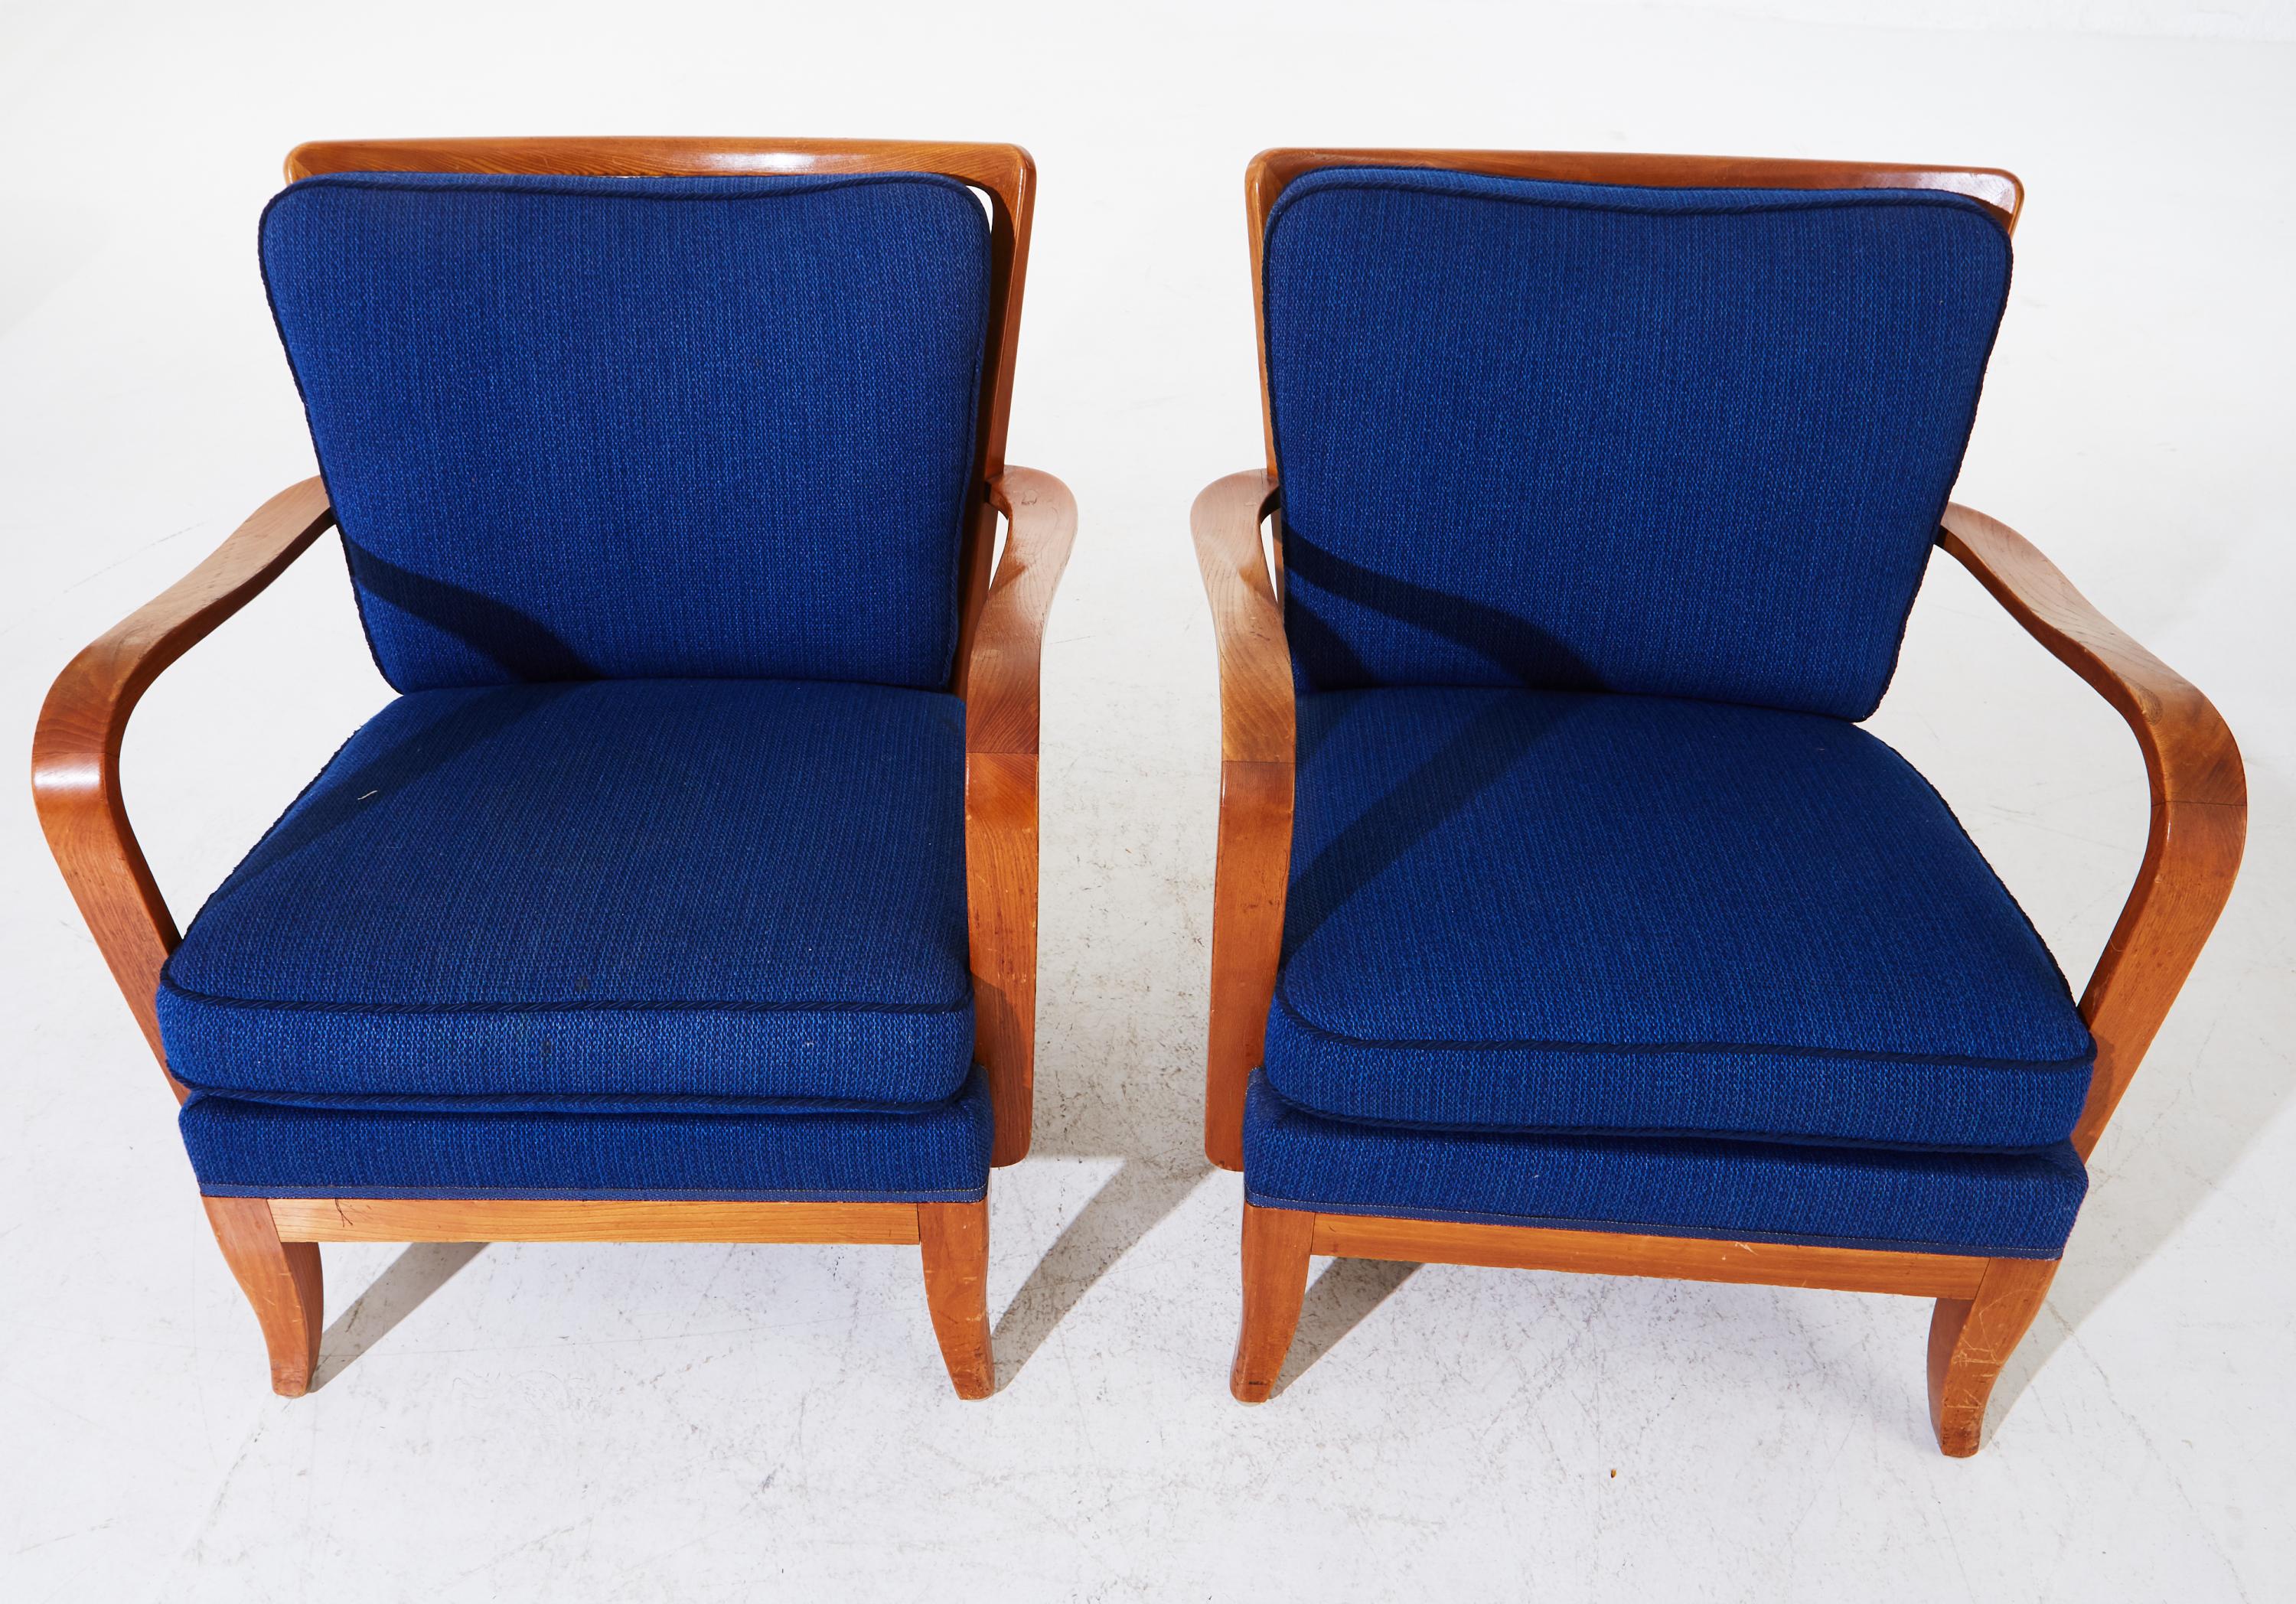 1 pair of Mid-Century Modern accent chairs lounge chairs
frame in elm wood, loose cushions upholstered in blue textile. Lovely examples with great lines.